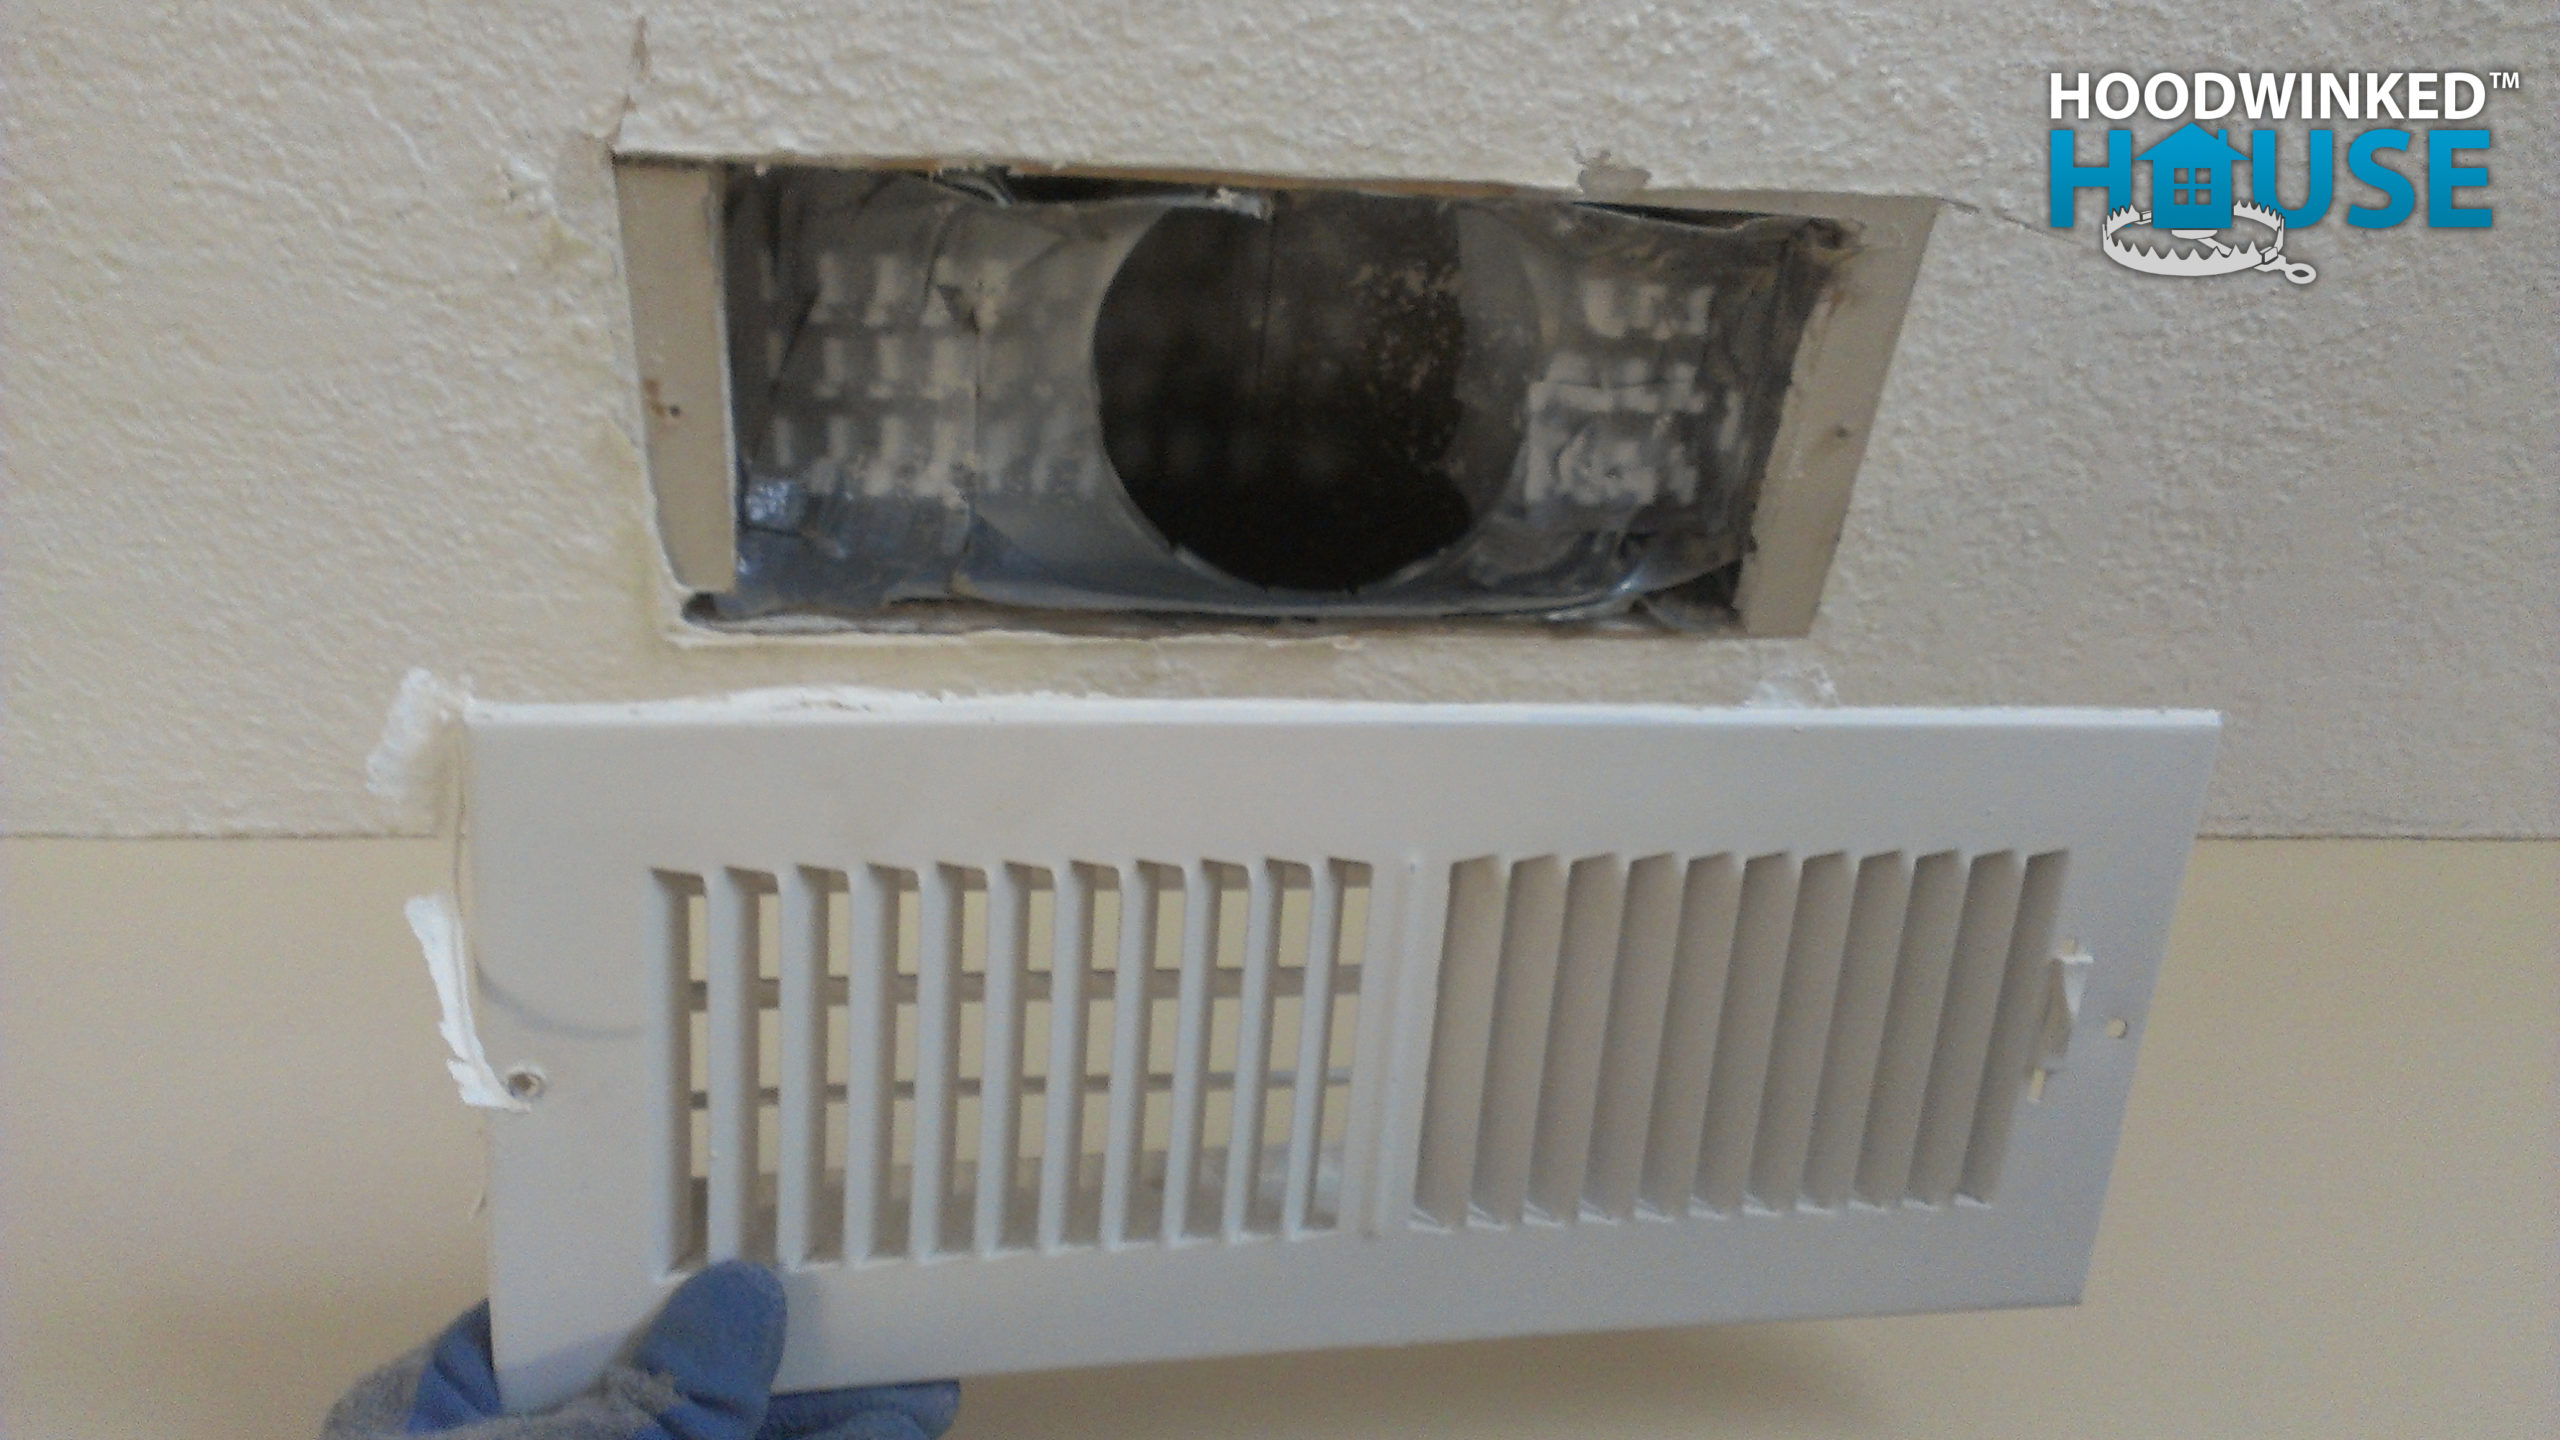 A removed ceiling grille reveals a missing duct boot and that one has been fashioned out of duct tape.